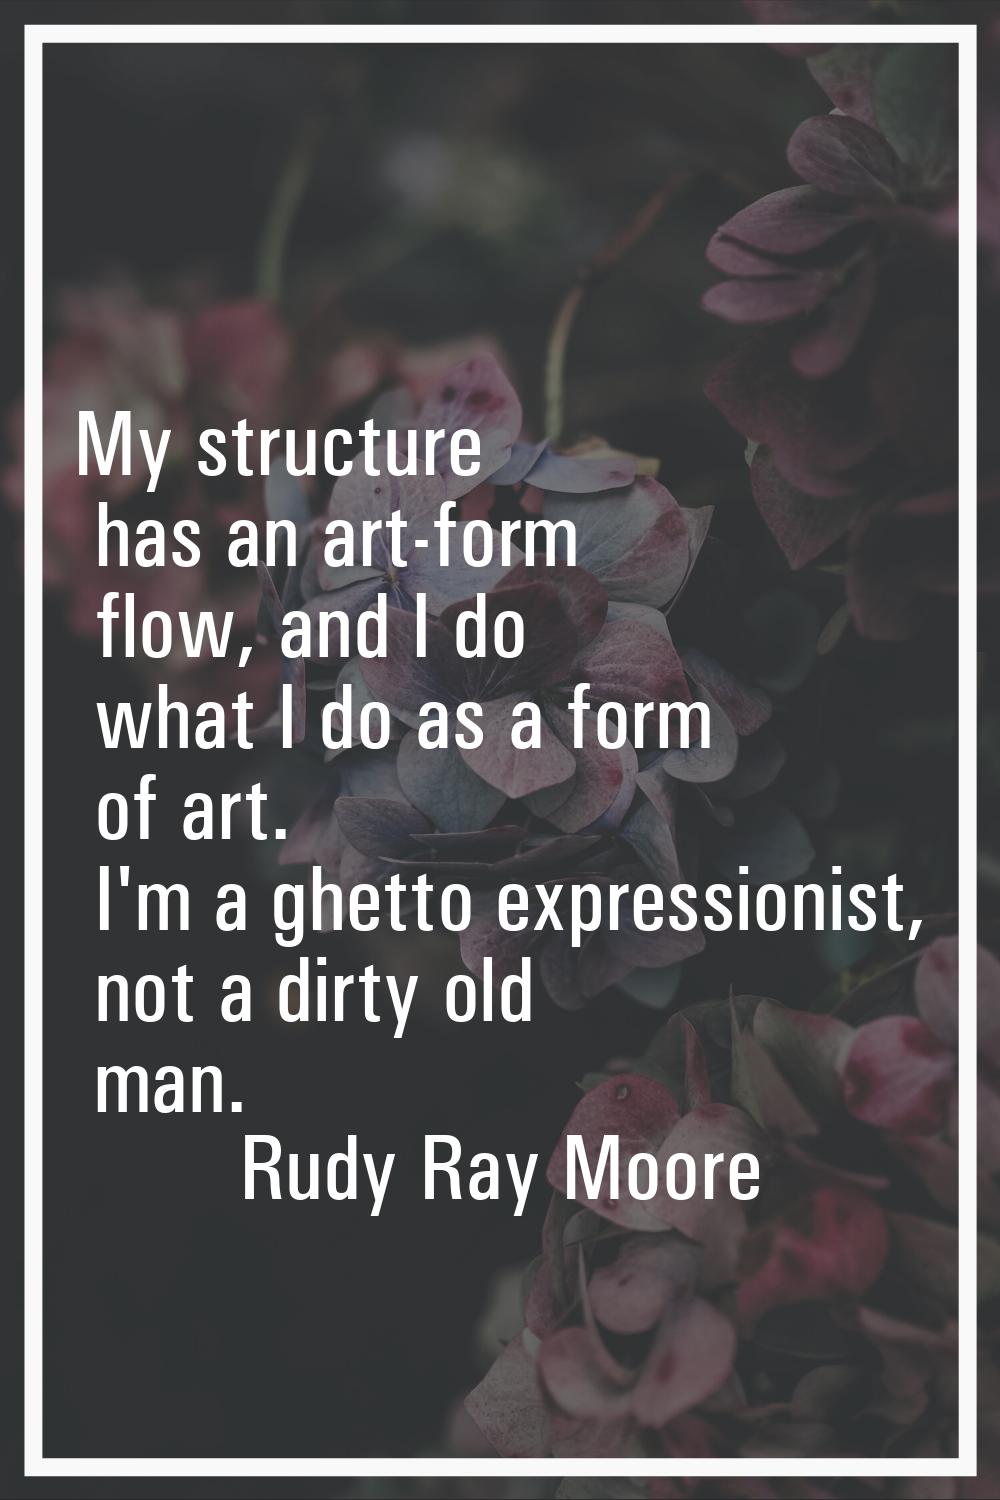 My structure has an art-form flow, and I do what I do as a form of art. I'm a ghetto expressionist,